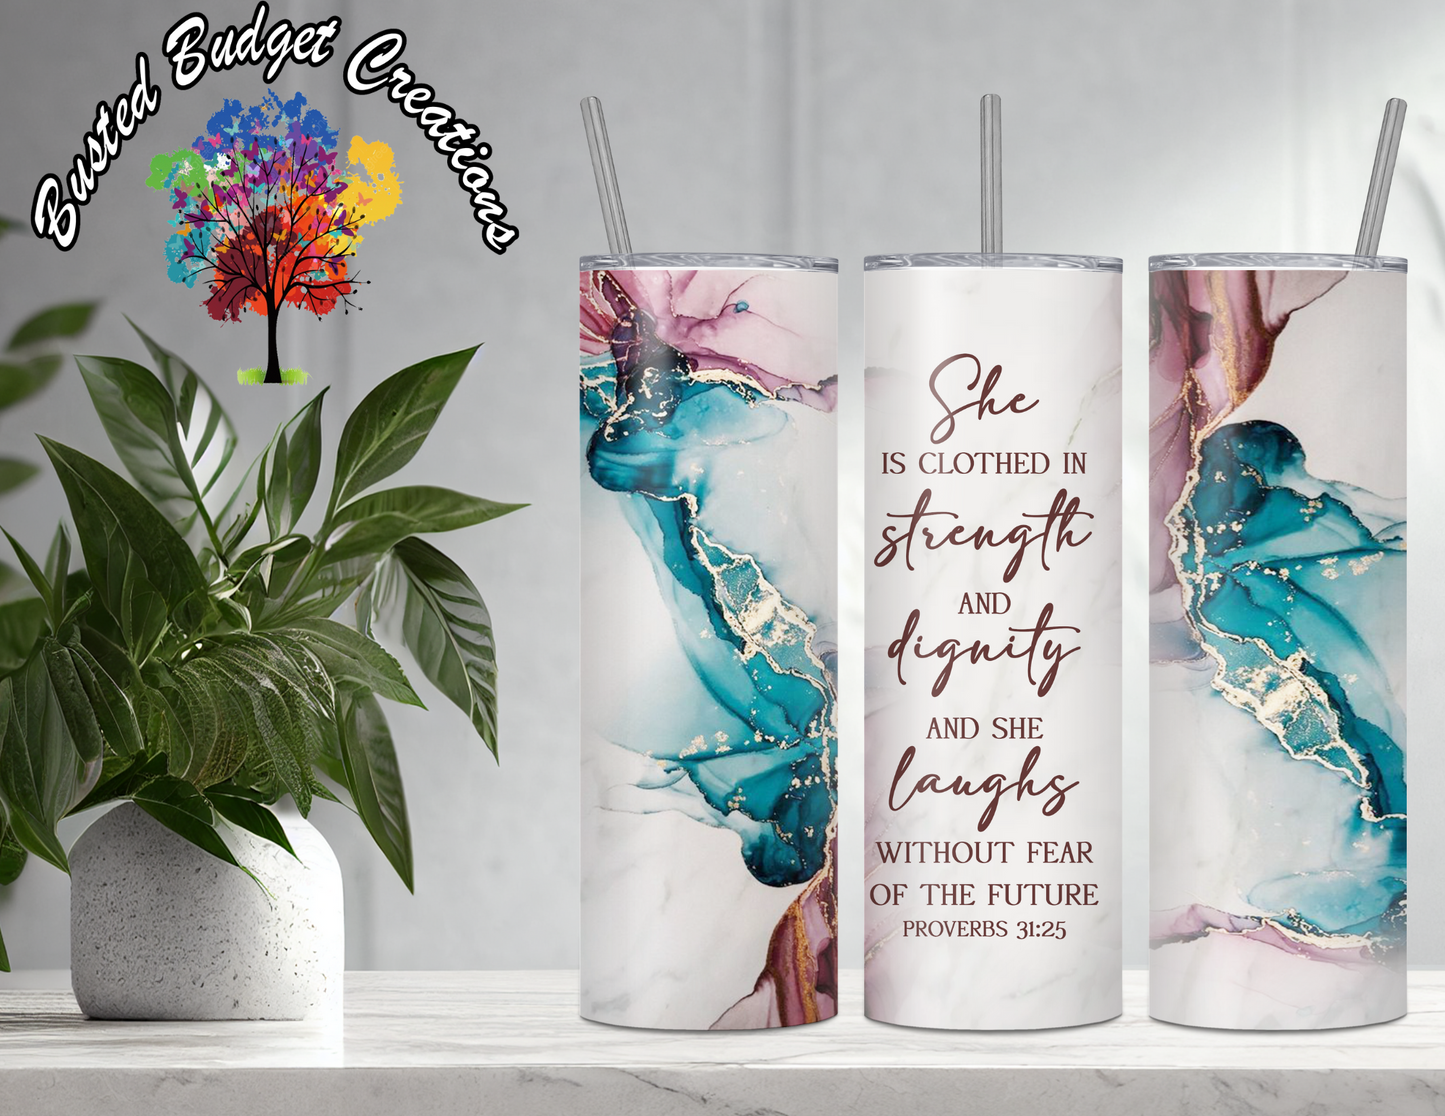 She Is Clothed In Strength - Proverbs 31:25 Tumbler